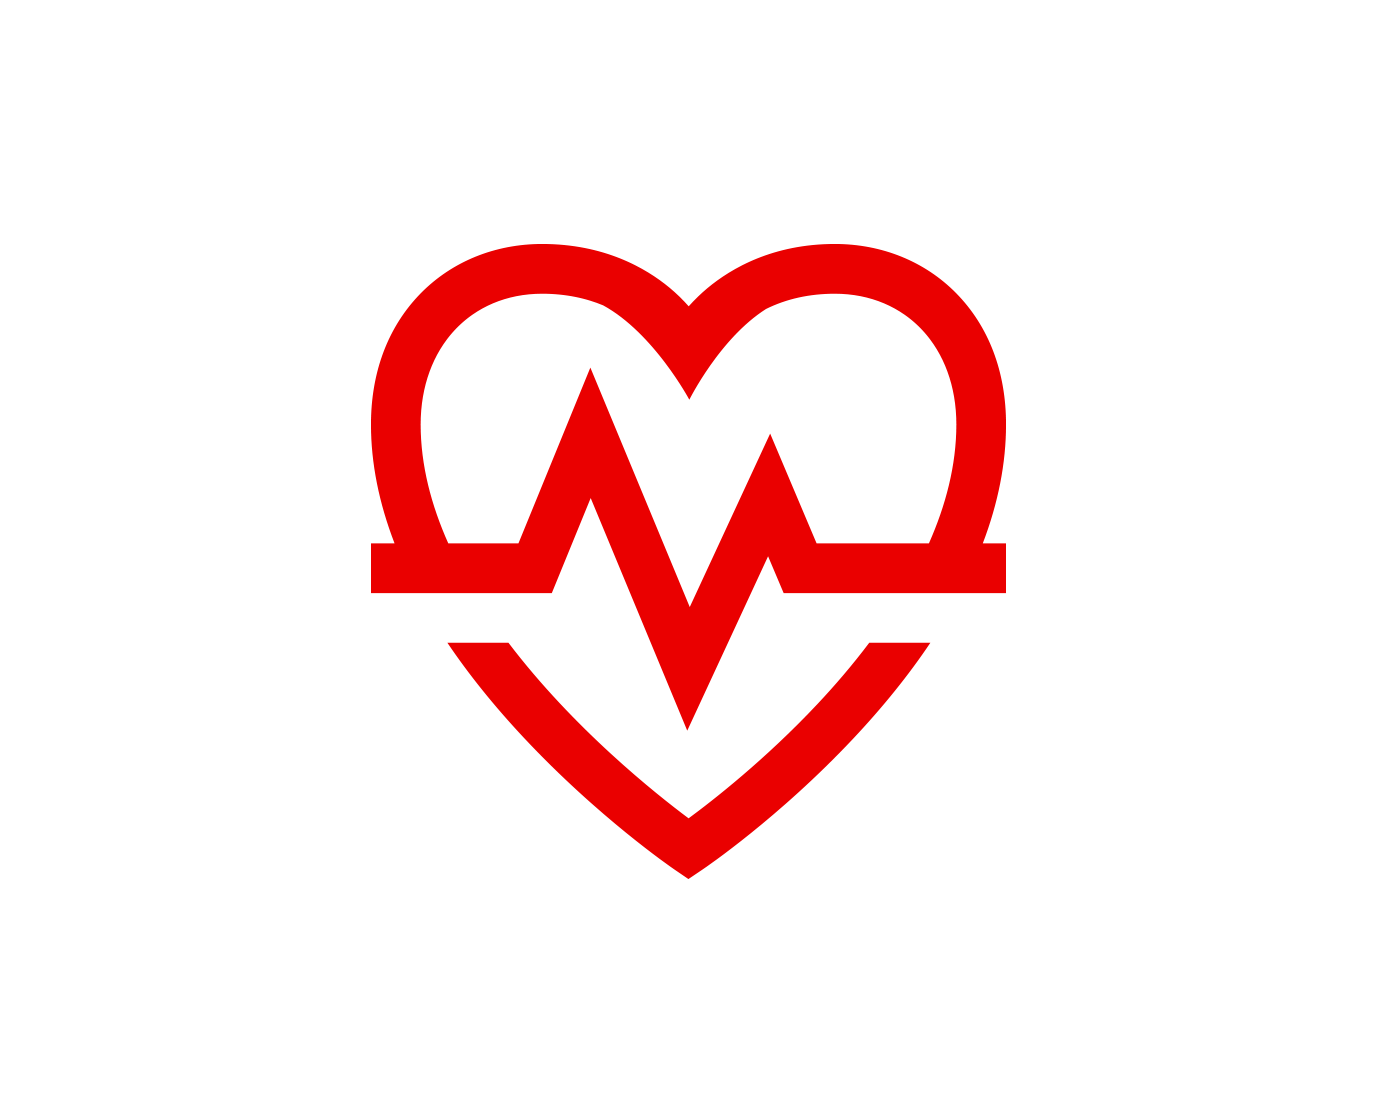 Image depicting a heart symbol to represent the reduction of heart disease risk with standing desks.